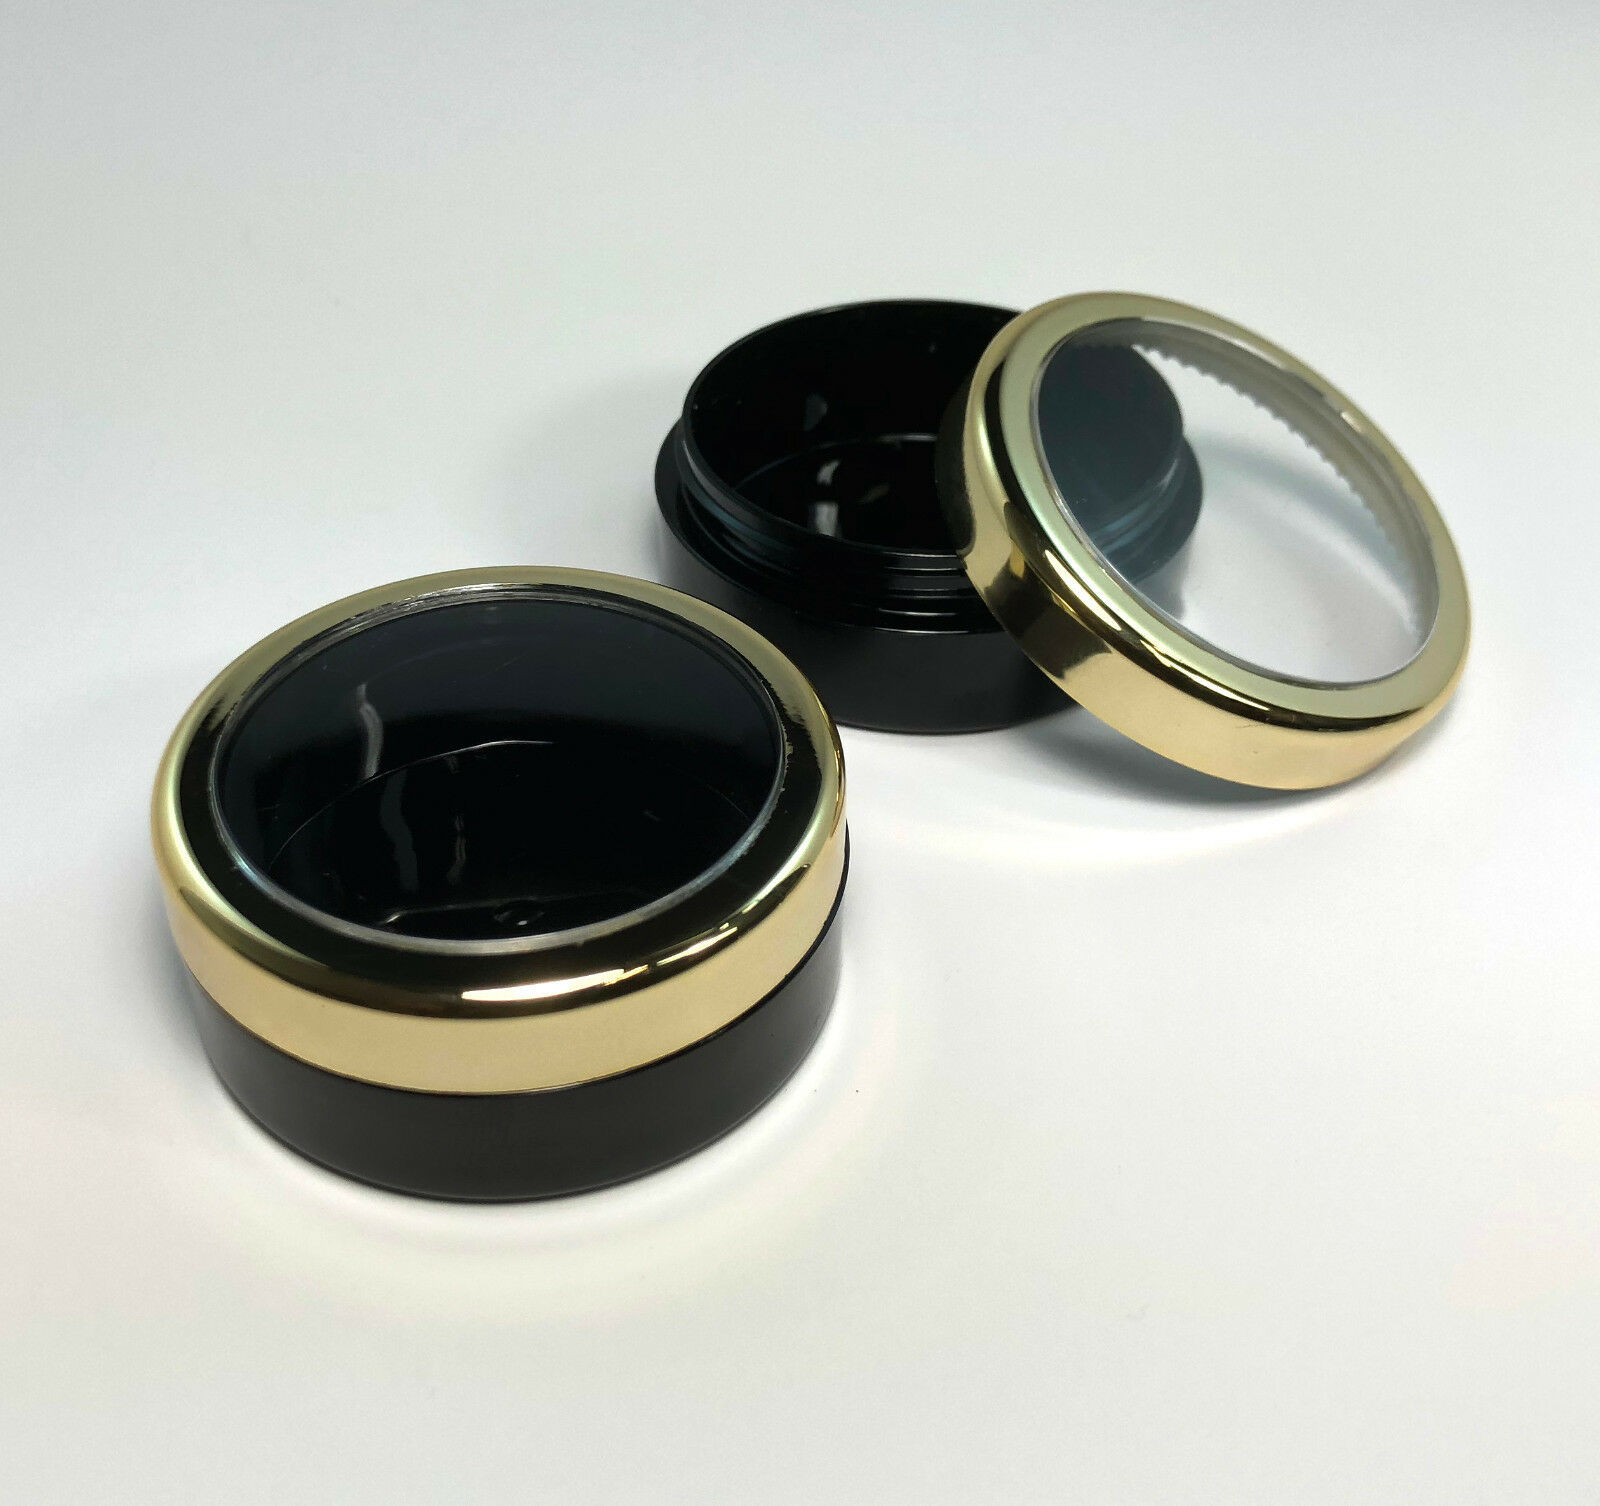 20 Cosmetic Jars Black Makeup Containers Gold Trim Acrylic Lid 20 Gram ...